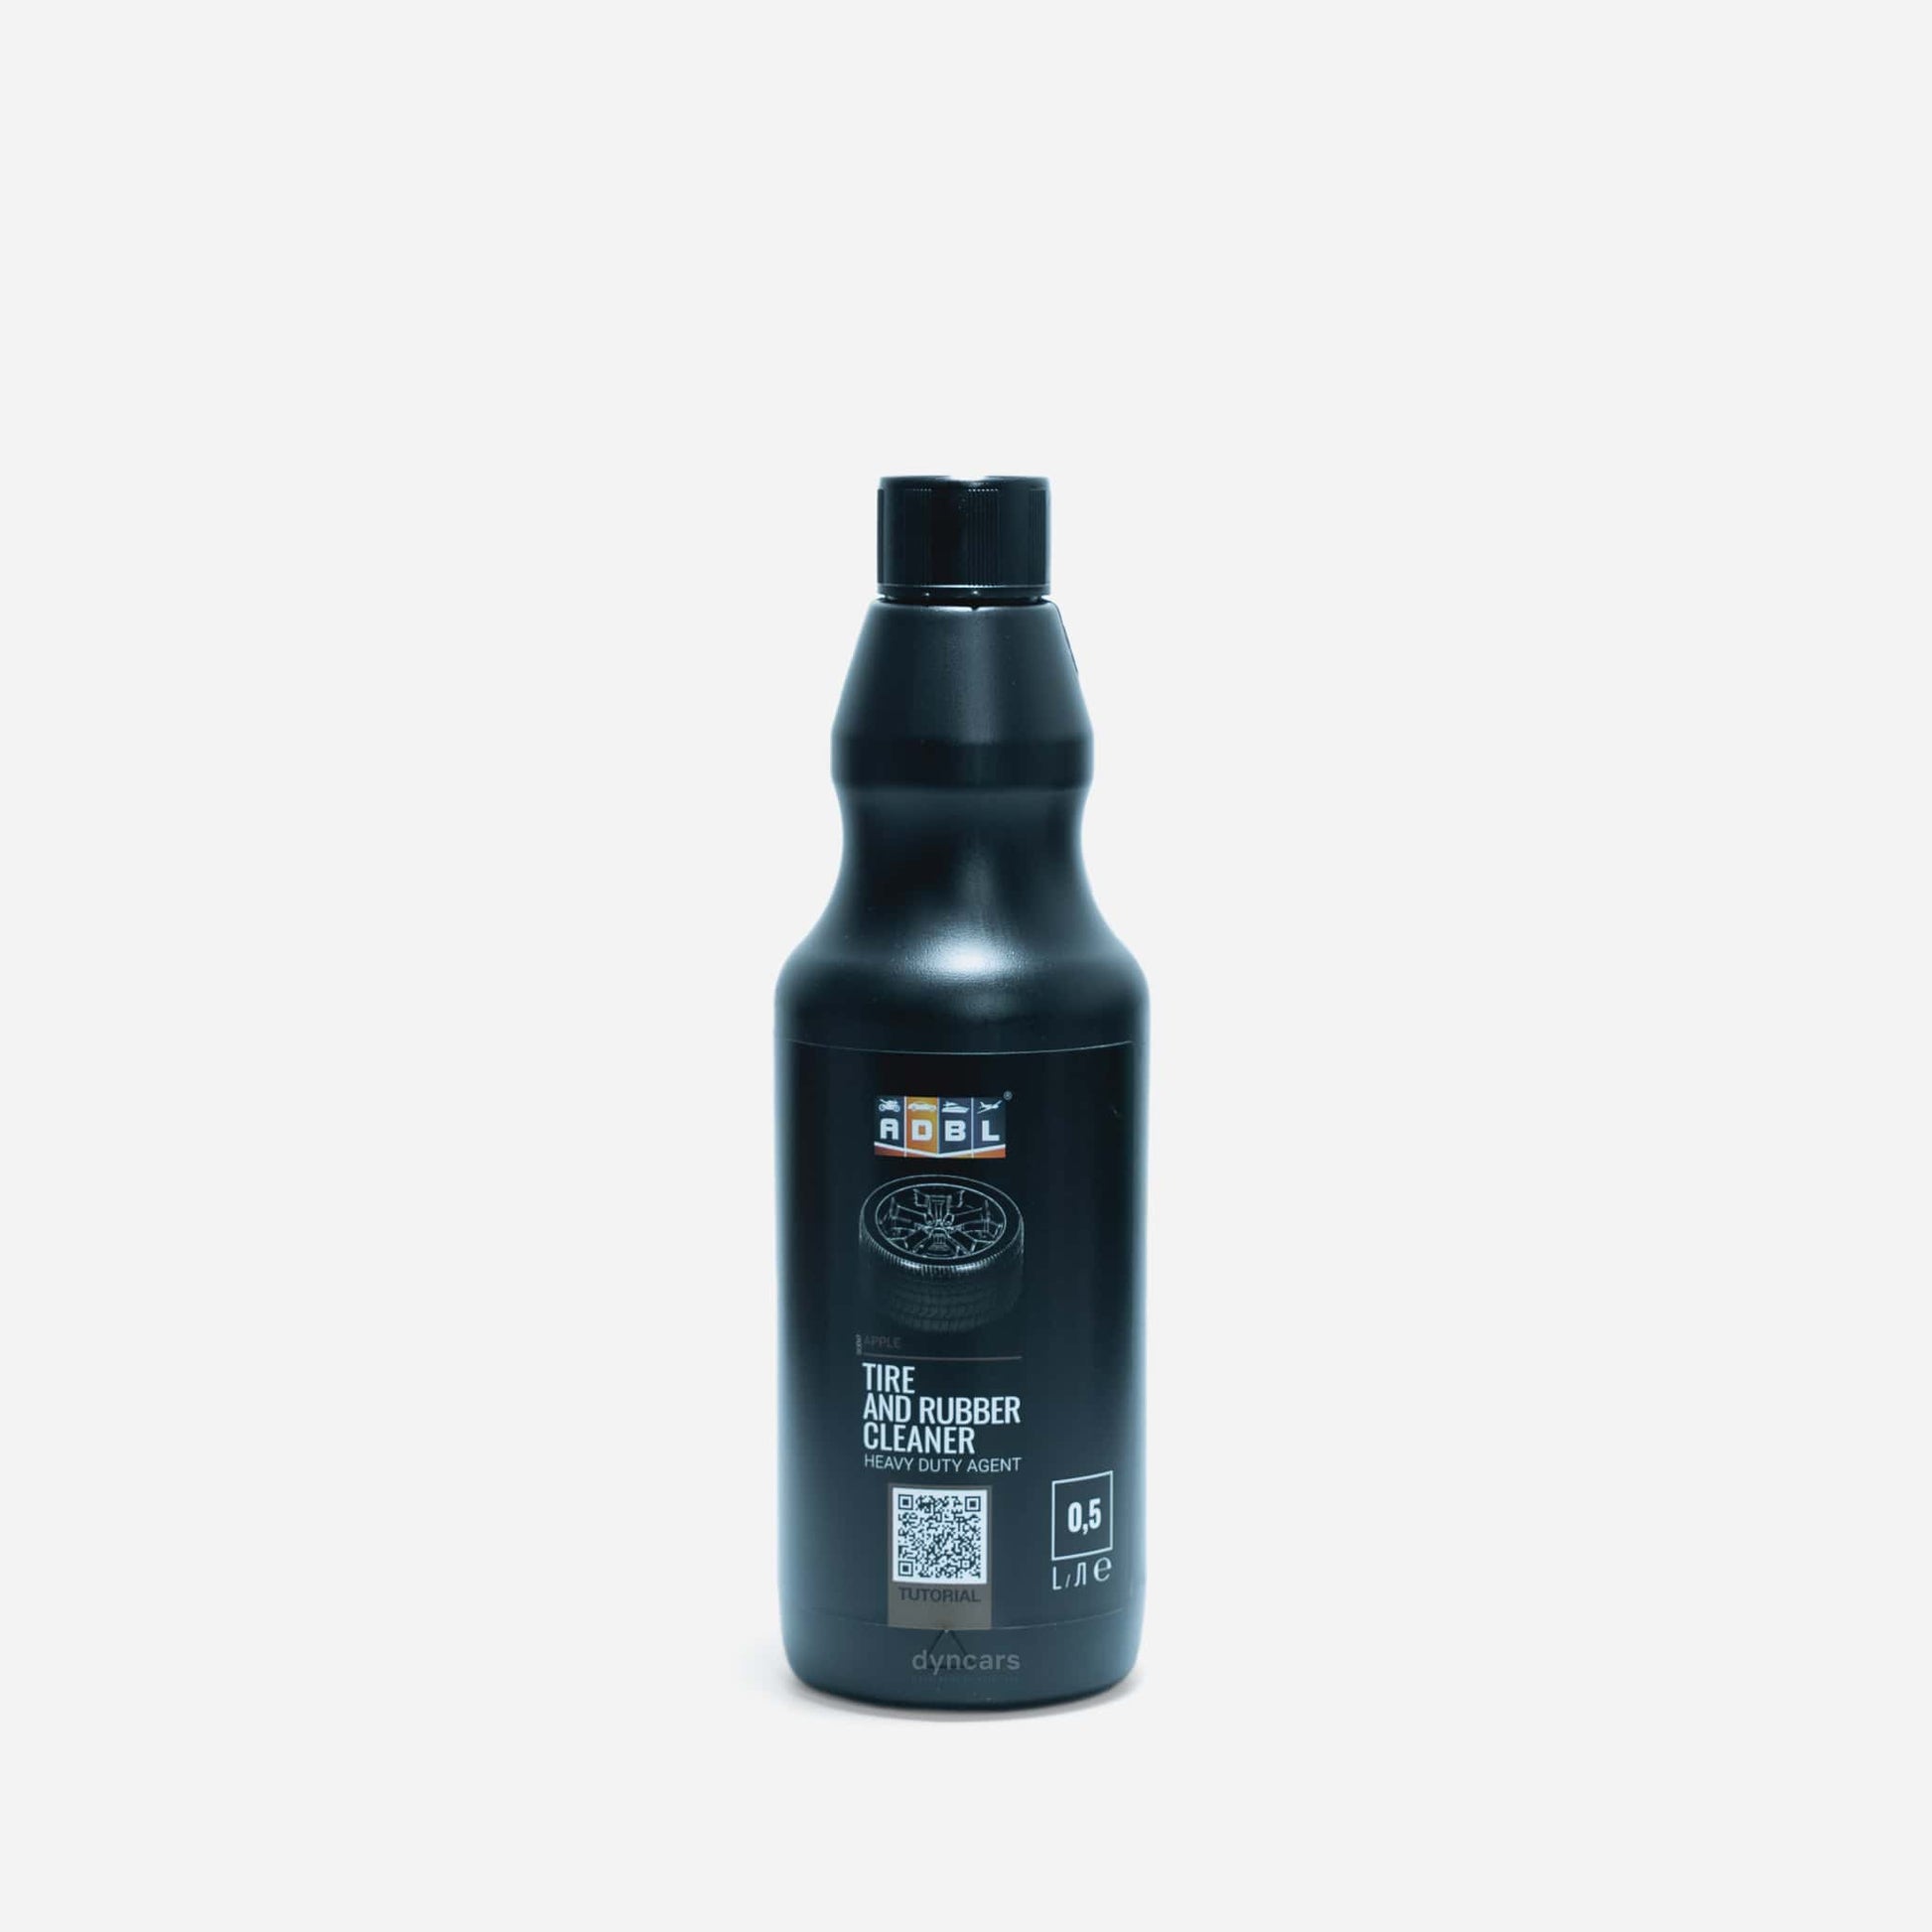 ADBL Tire and rubber cleaner